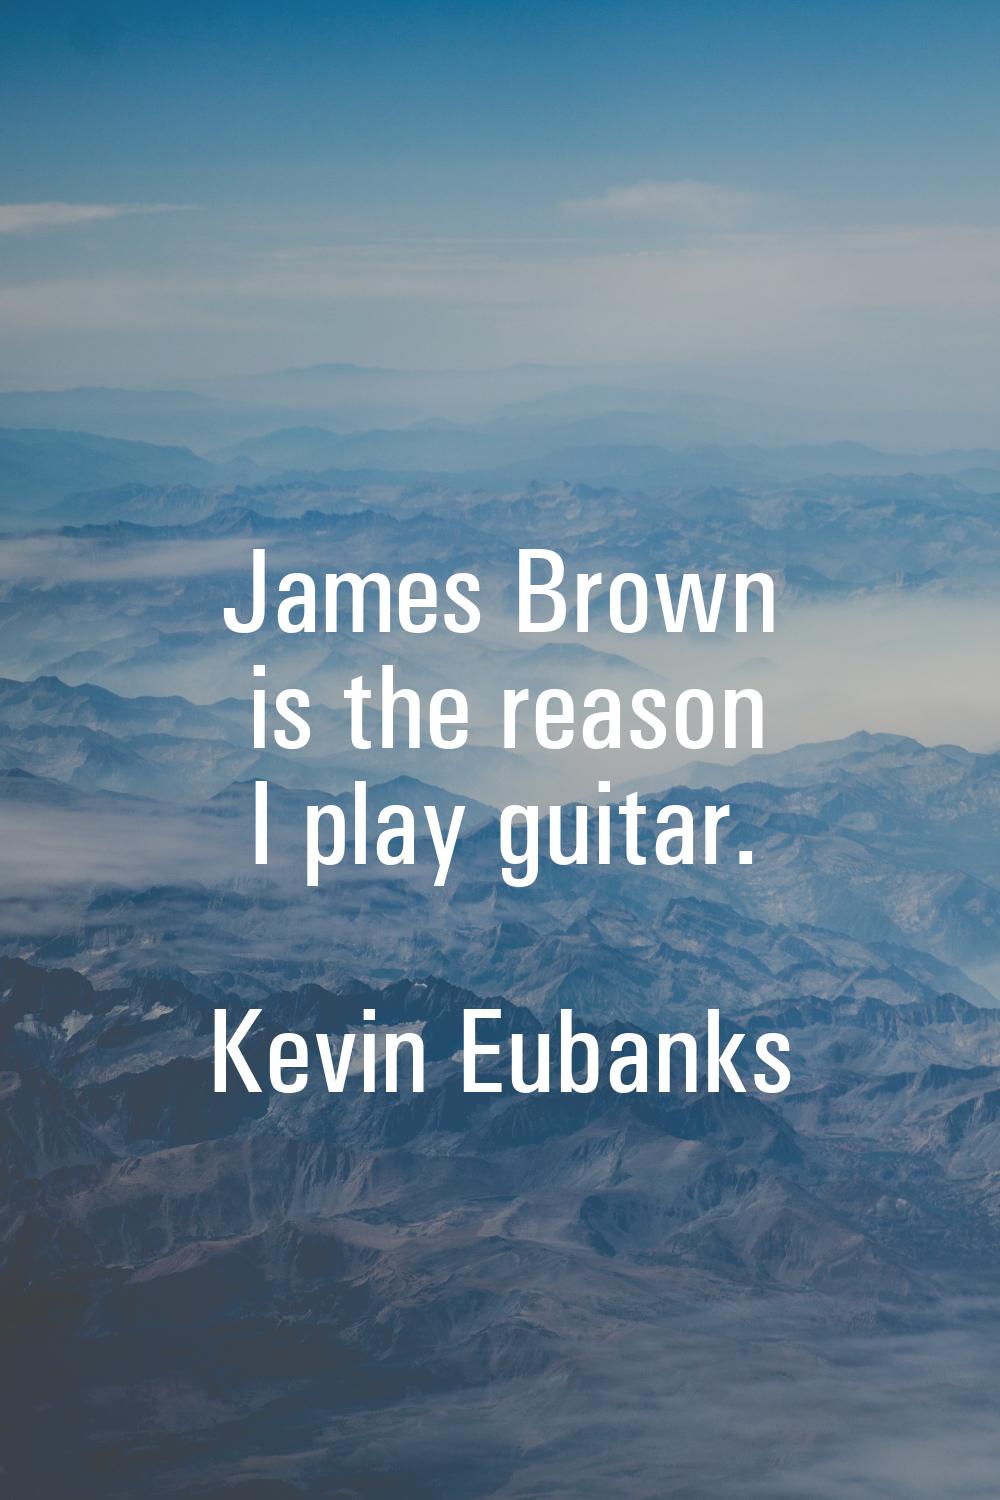 James Brown is the reason I play guitar.